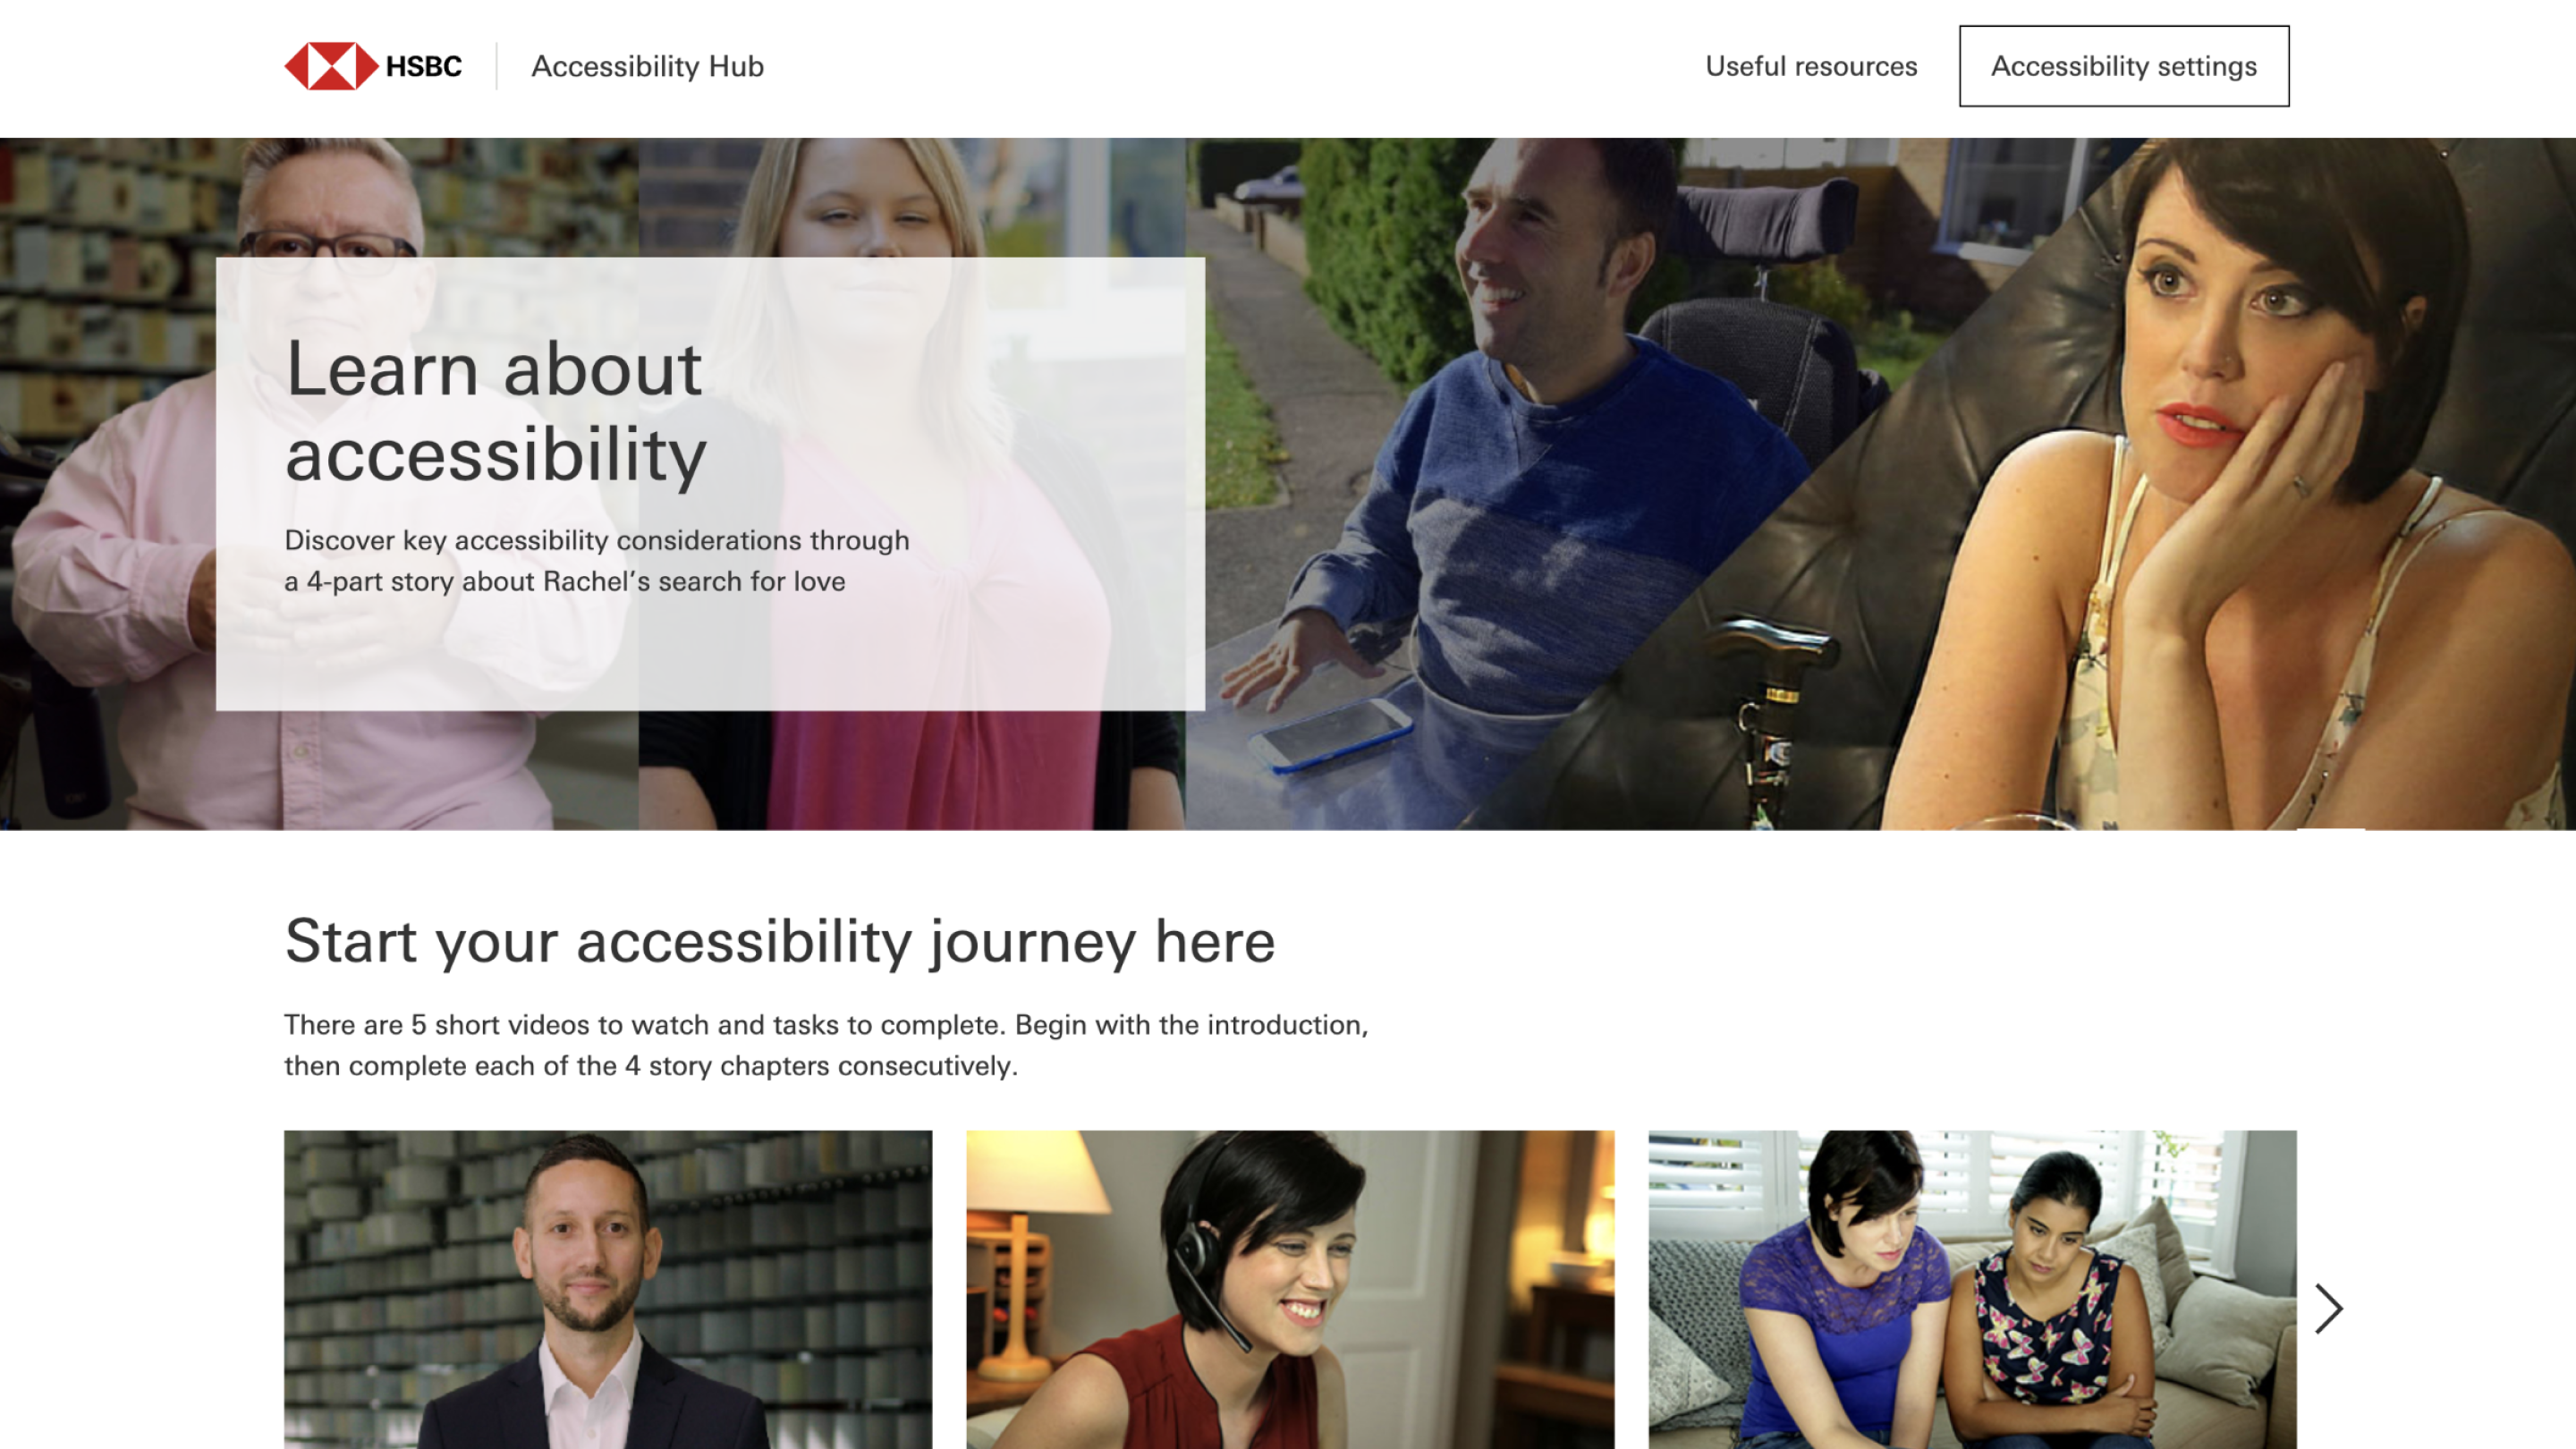 Screen shot of the Accessibility Hub website